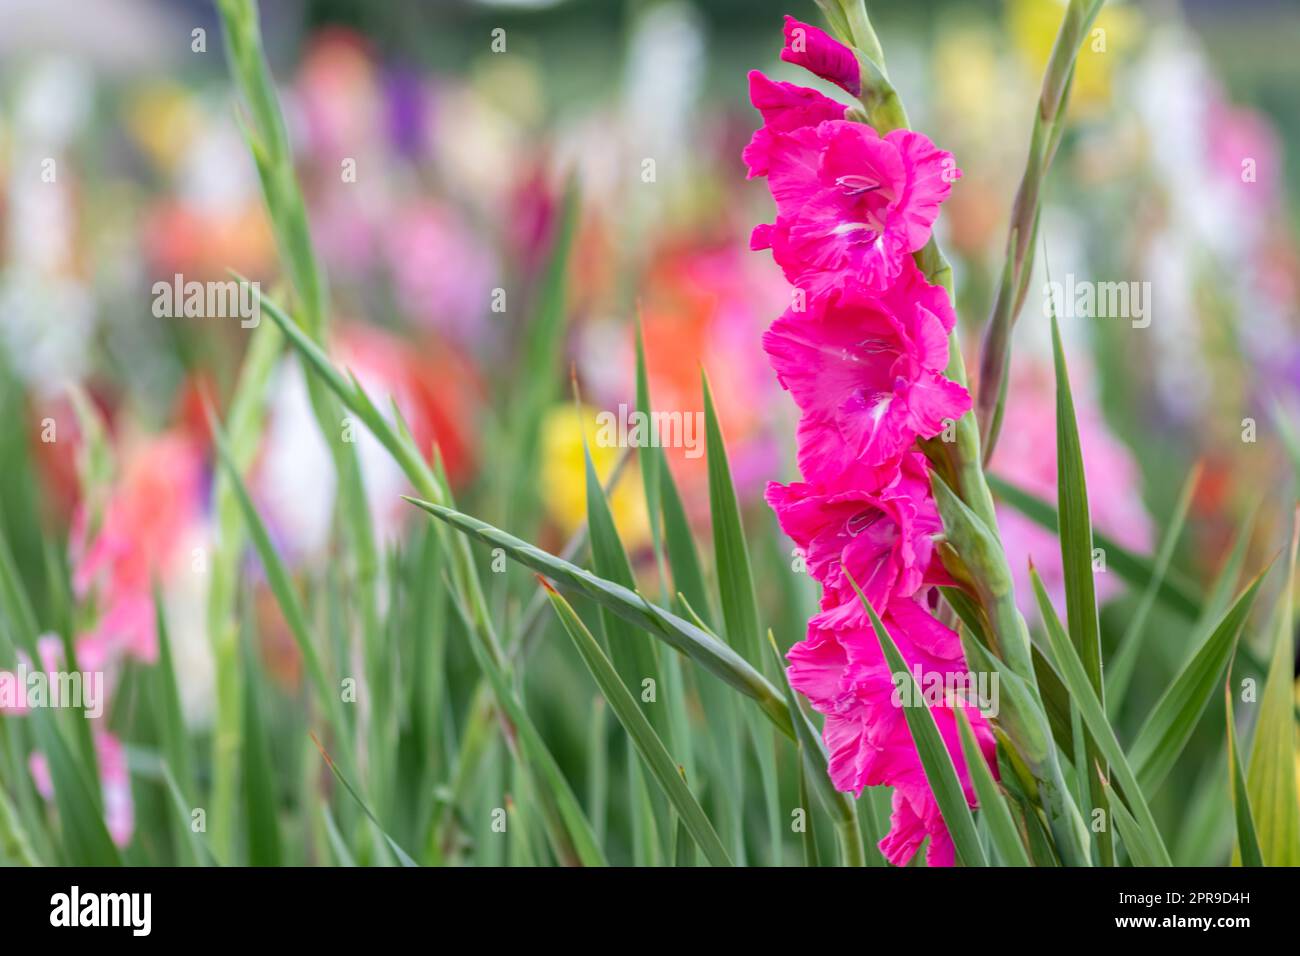 Field of flowers to cut by yourself in intense colors and vibrant colors shows the summer from floral and colorful side with different flowers and many colorful blossoms for mothers day or valentines Stock Photo